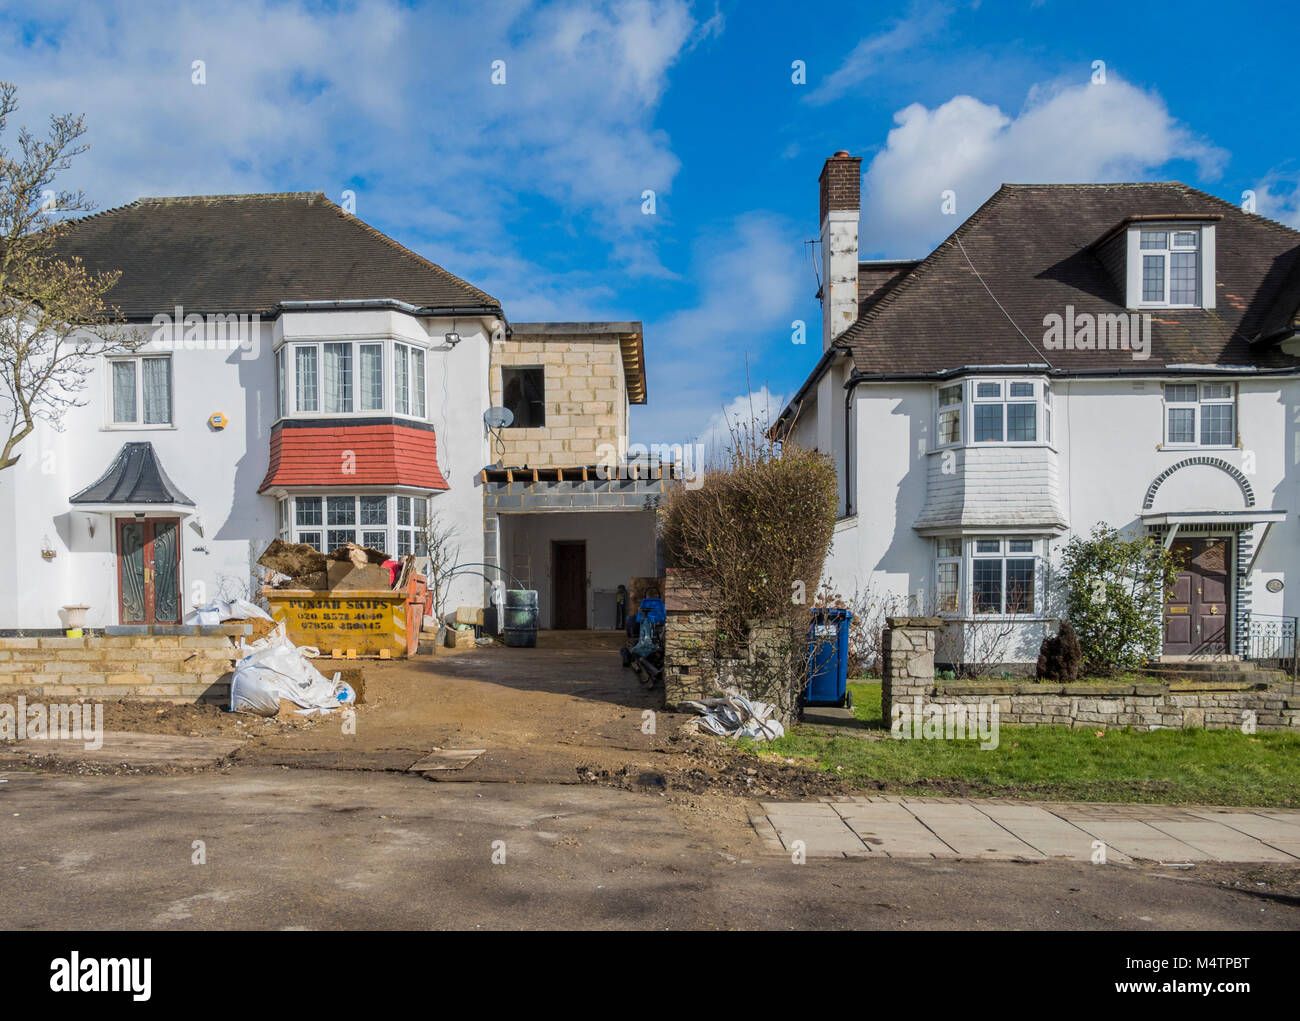 Two storey side extension undergoing construction at a large, period property, on Watford Way - a main road in Hendon, London NW4, England, UK. Stock Photo